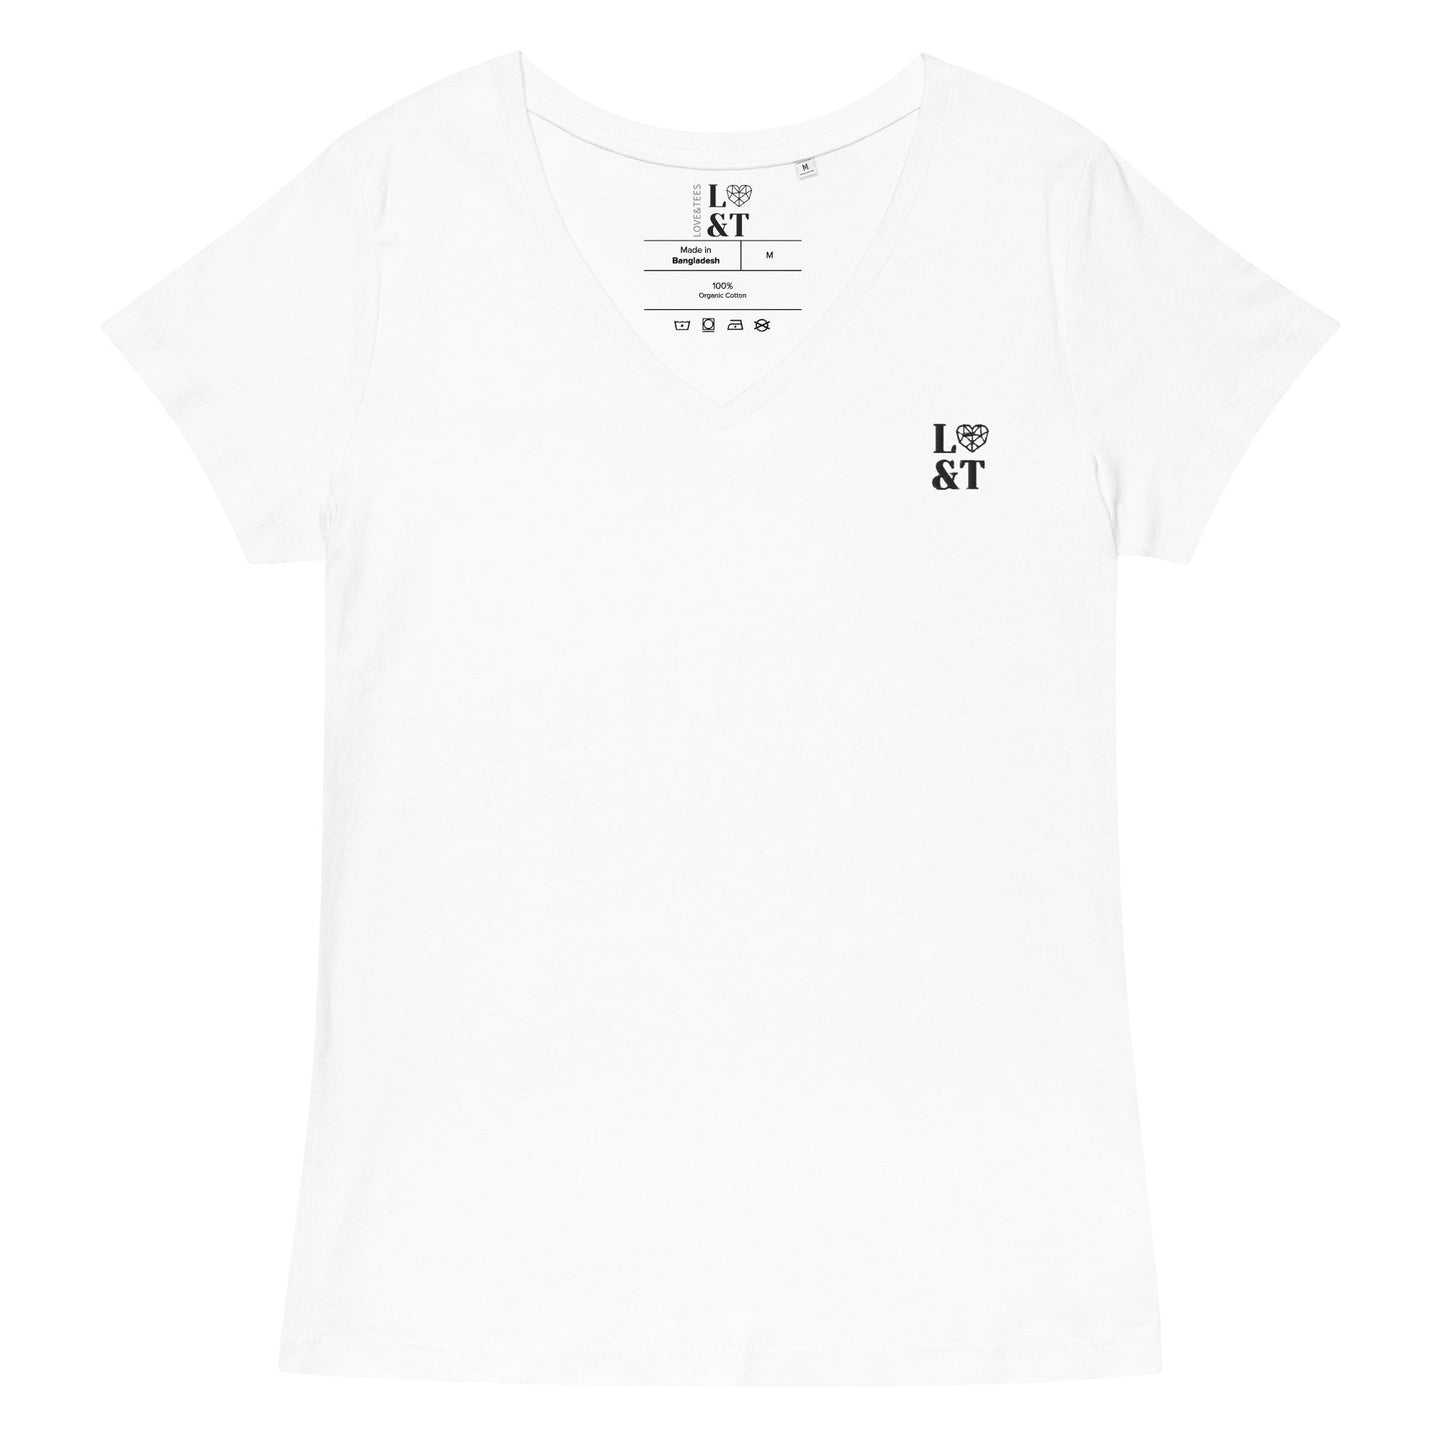 L&T's Women’s Fitted V-Neck T-Shirt